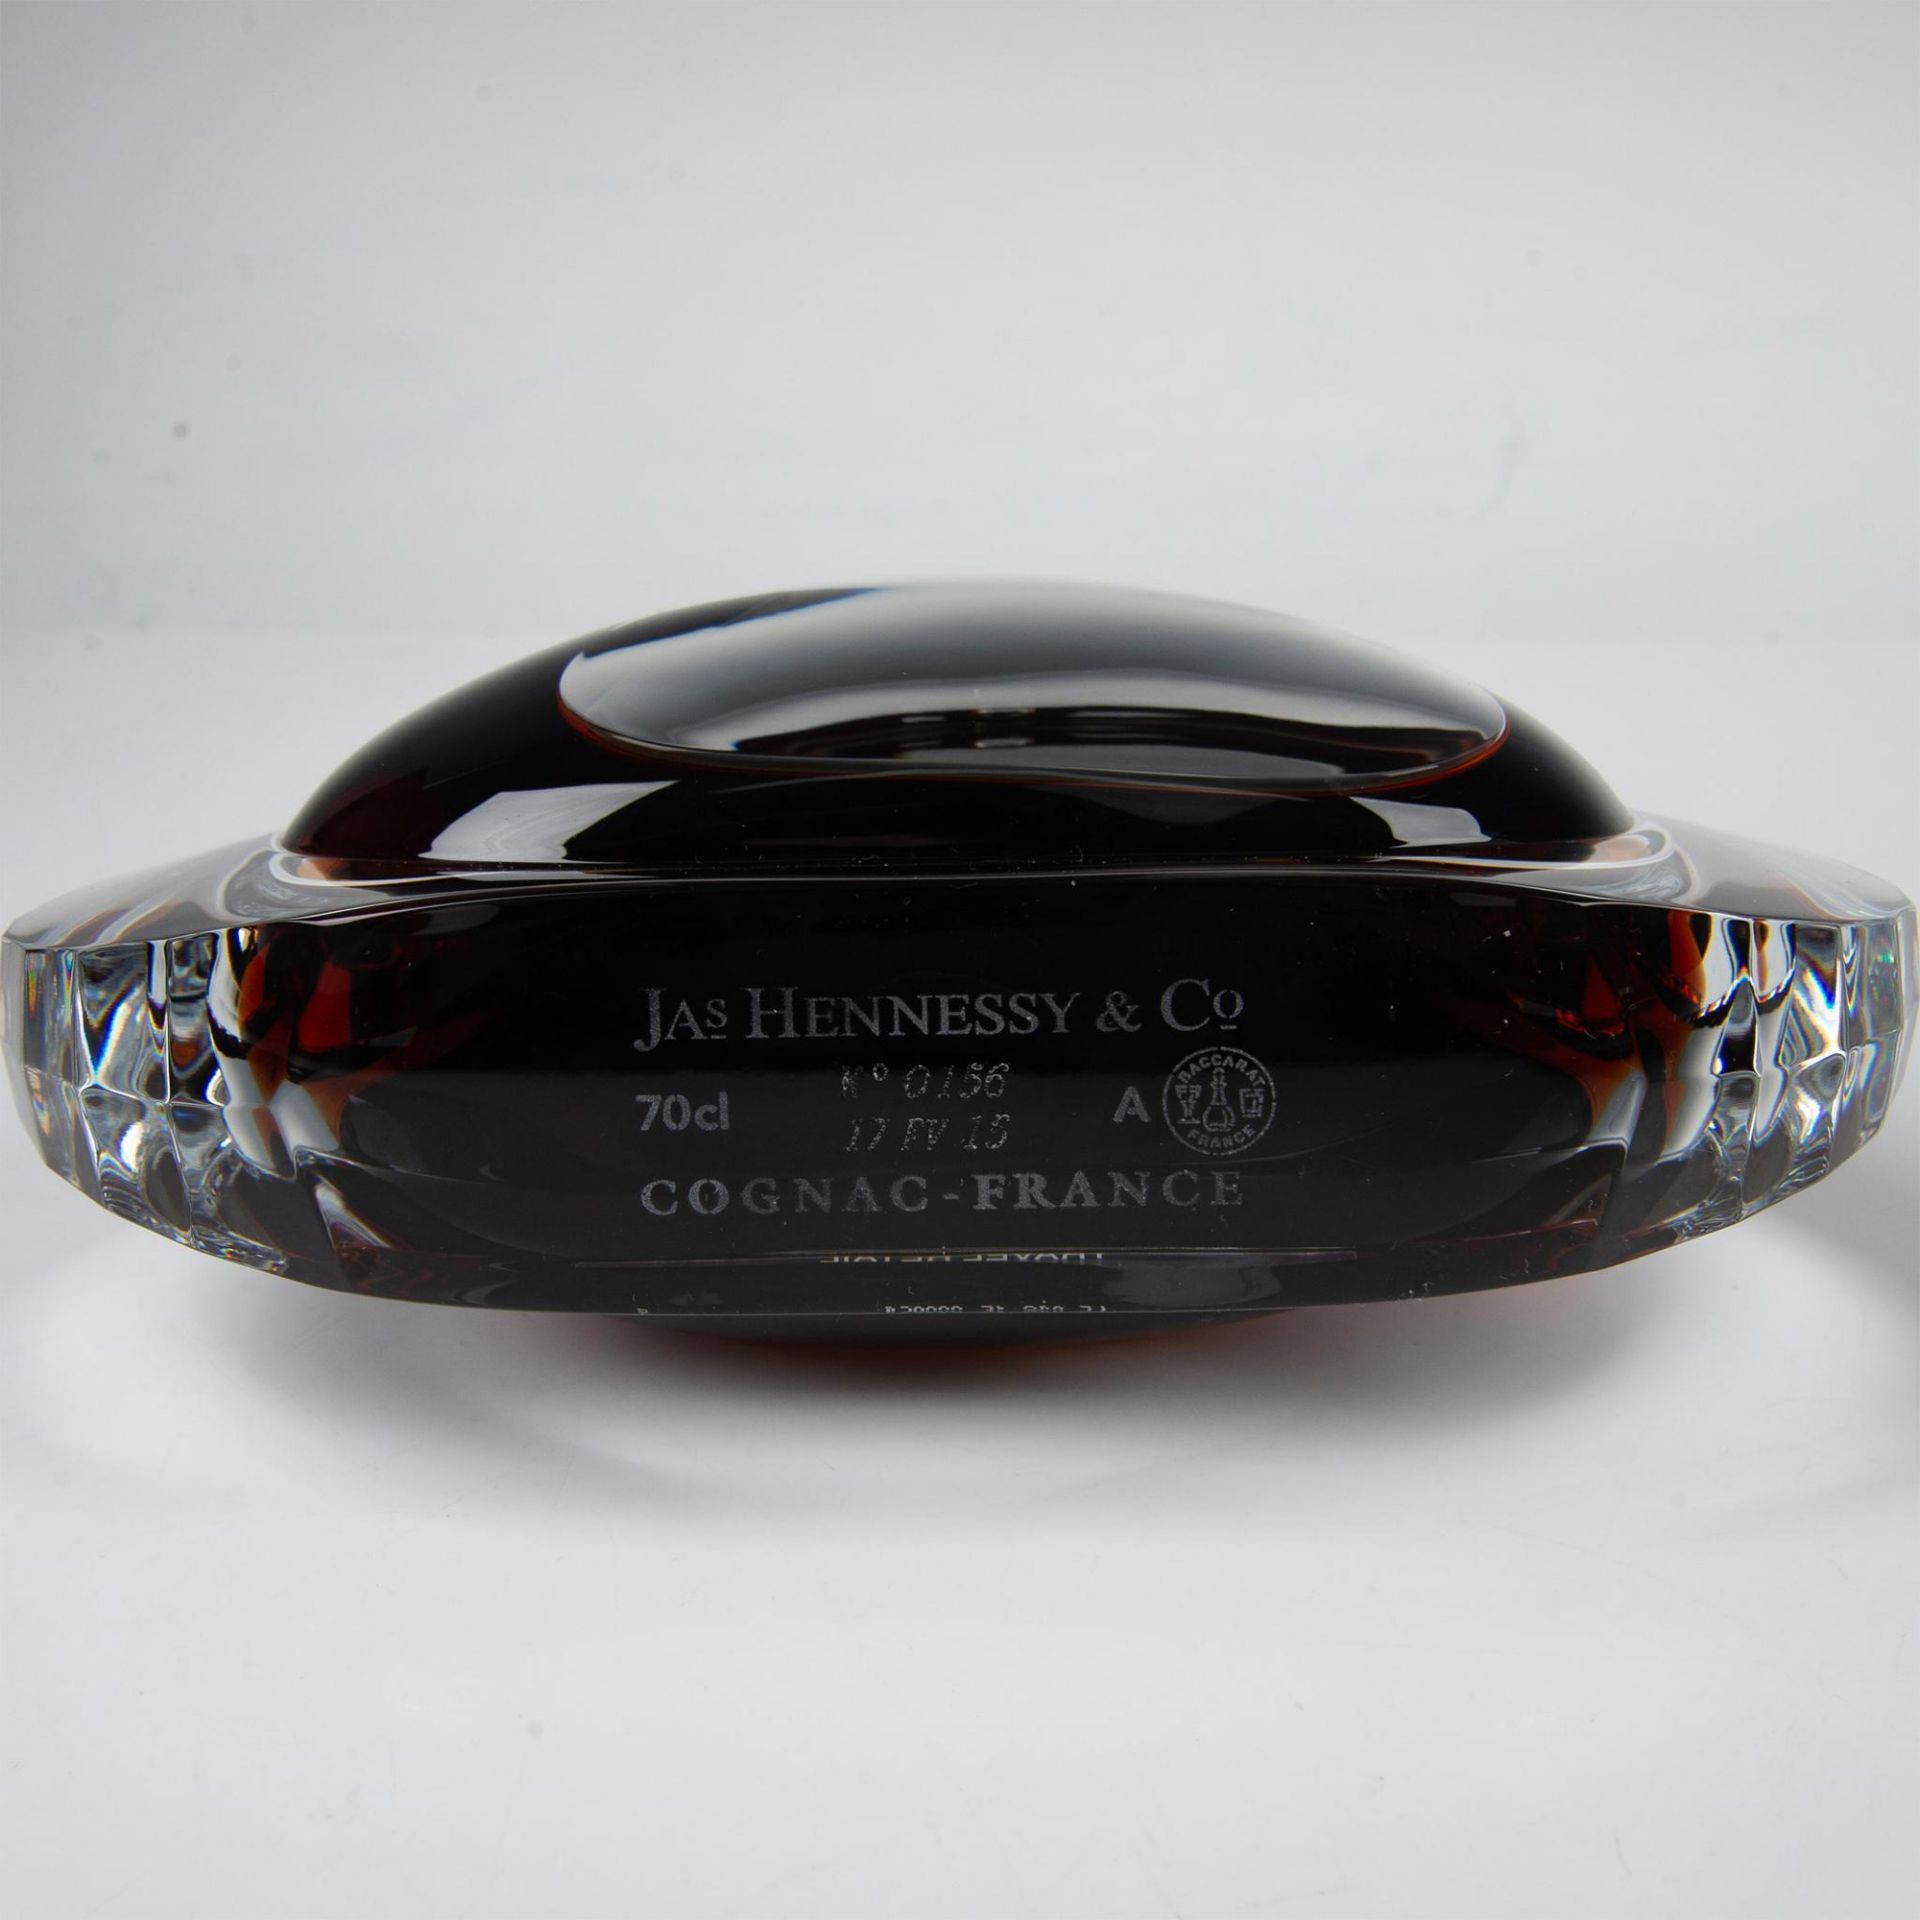 Richard Hennessy & Co. Cognac, Baccarat Crystal - Image 9 of 19